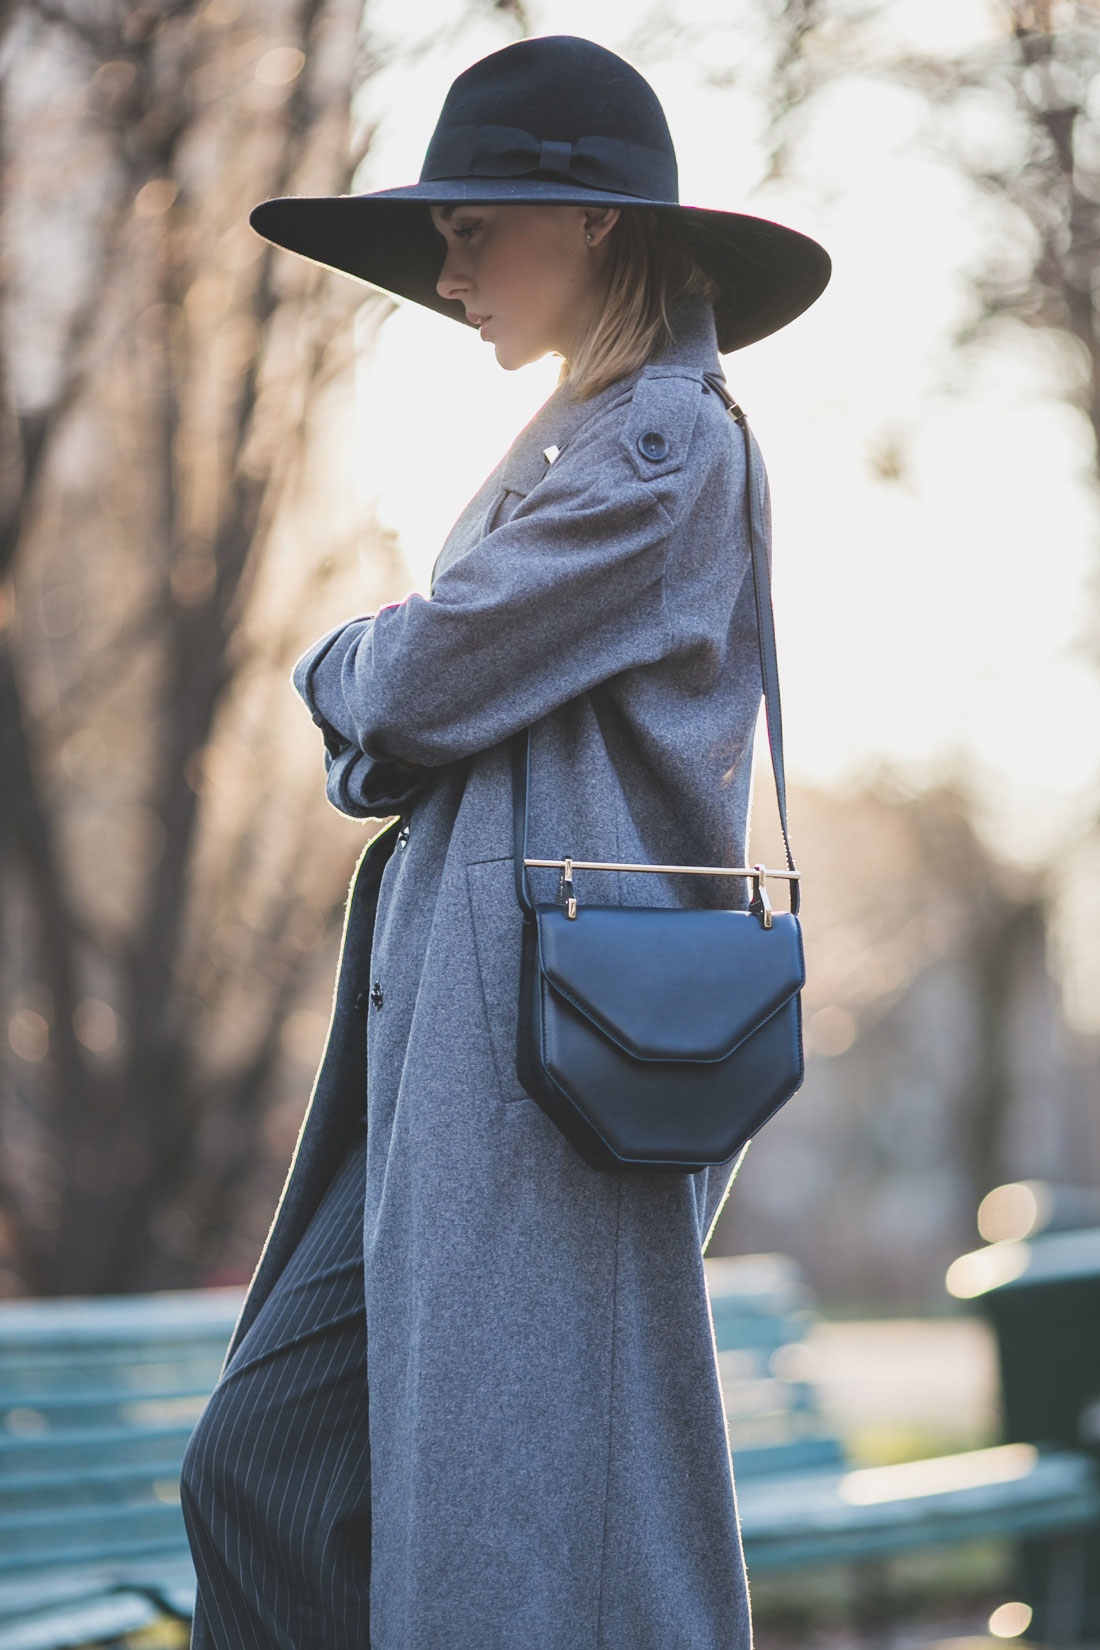 darya-kamalova-thecablook-fashion-lifestyle-russian-italian-blogger-wears-asos-total-look-grey-long-coat-with-nike-white-air-force-and-m2malletier-black-bag-on-mfw-milan-fashion-week-2015-1205